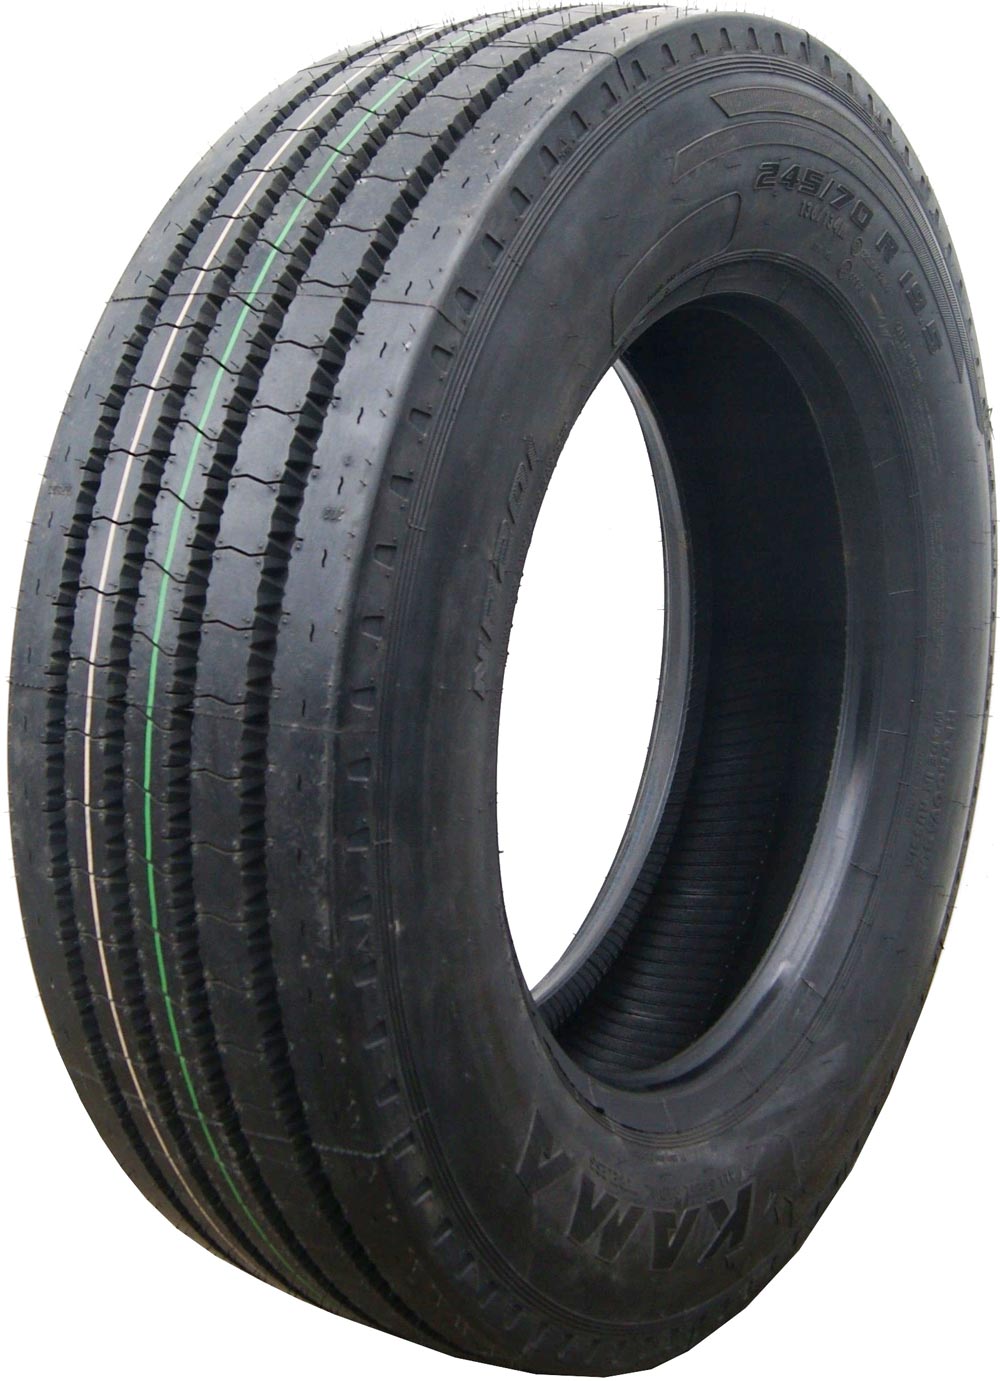 product_type-heavy_tires KAMA NF201 275/70 R22.5 148M